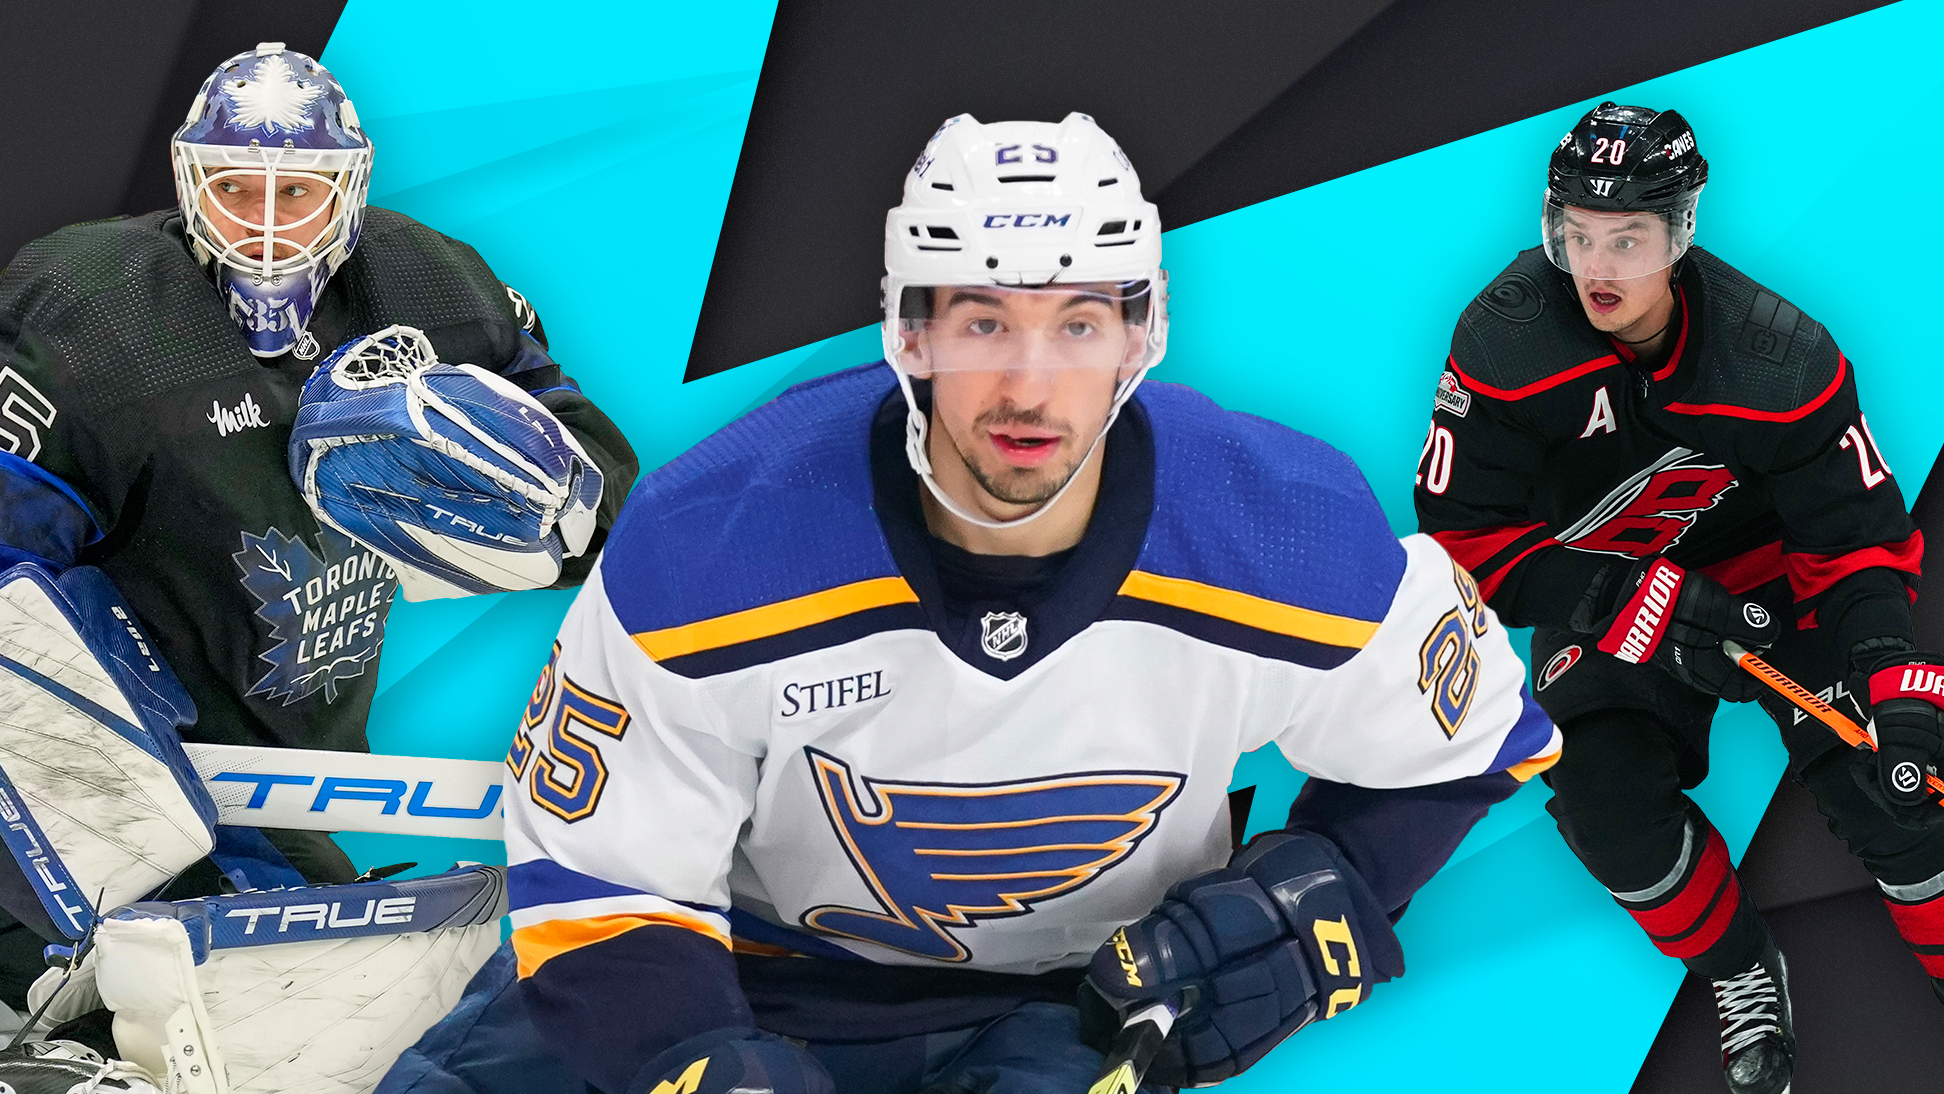 Challenging offseason decisions ahead for the Blues